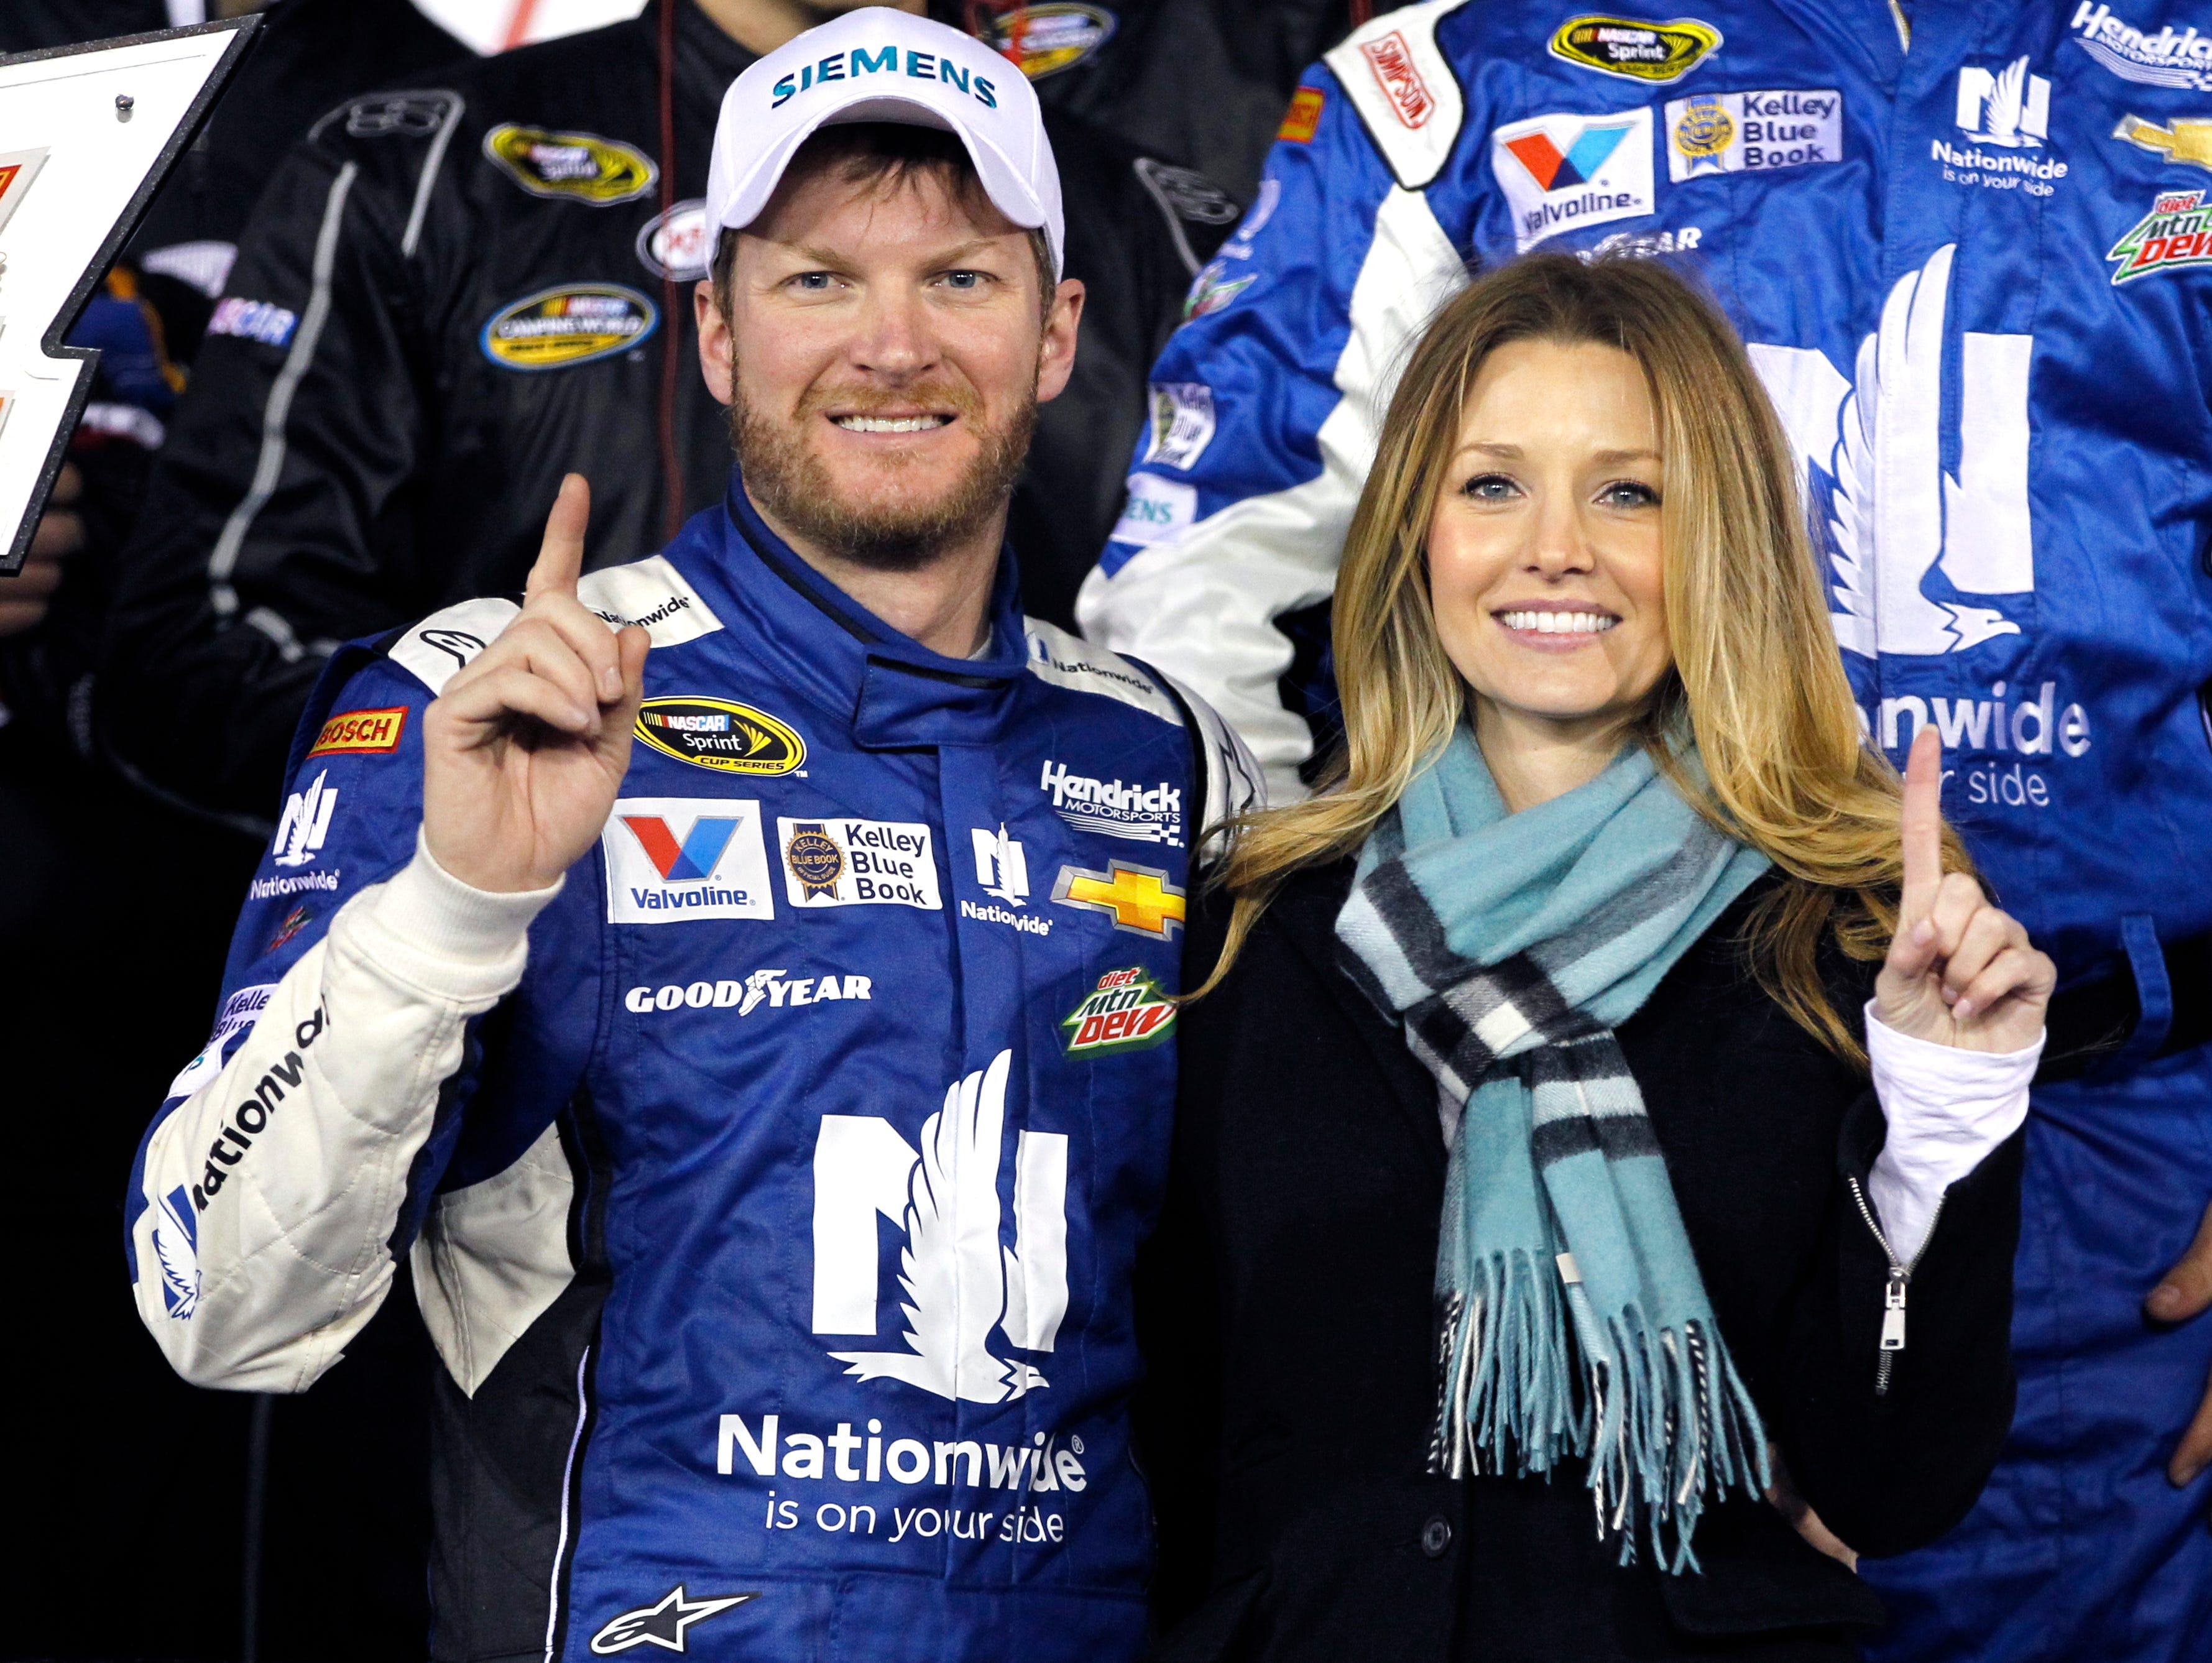 Dale Jr. engaged to former UK cheerleader | USA TODAY Sports